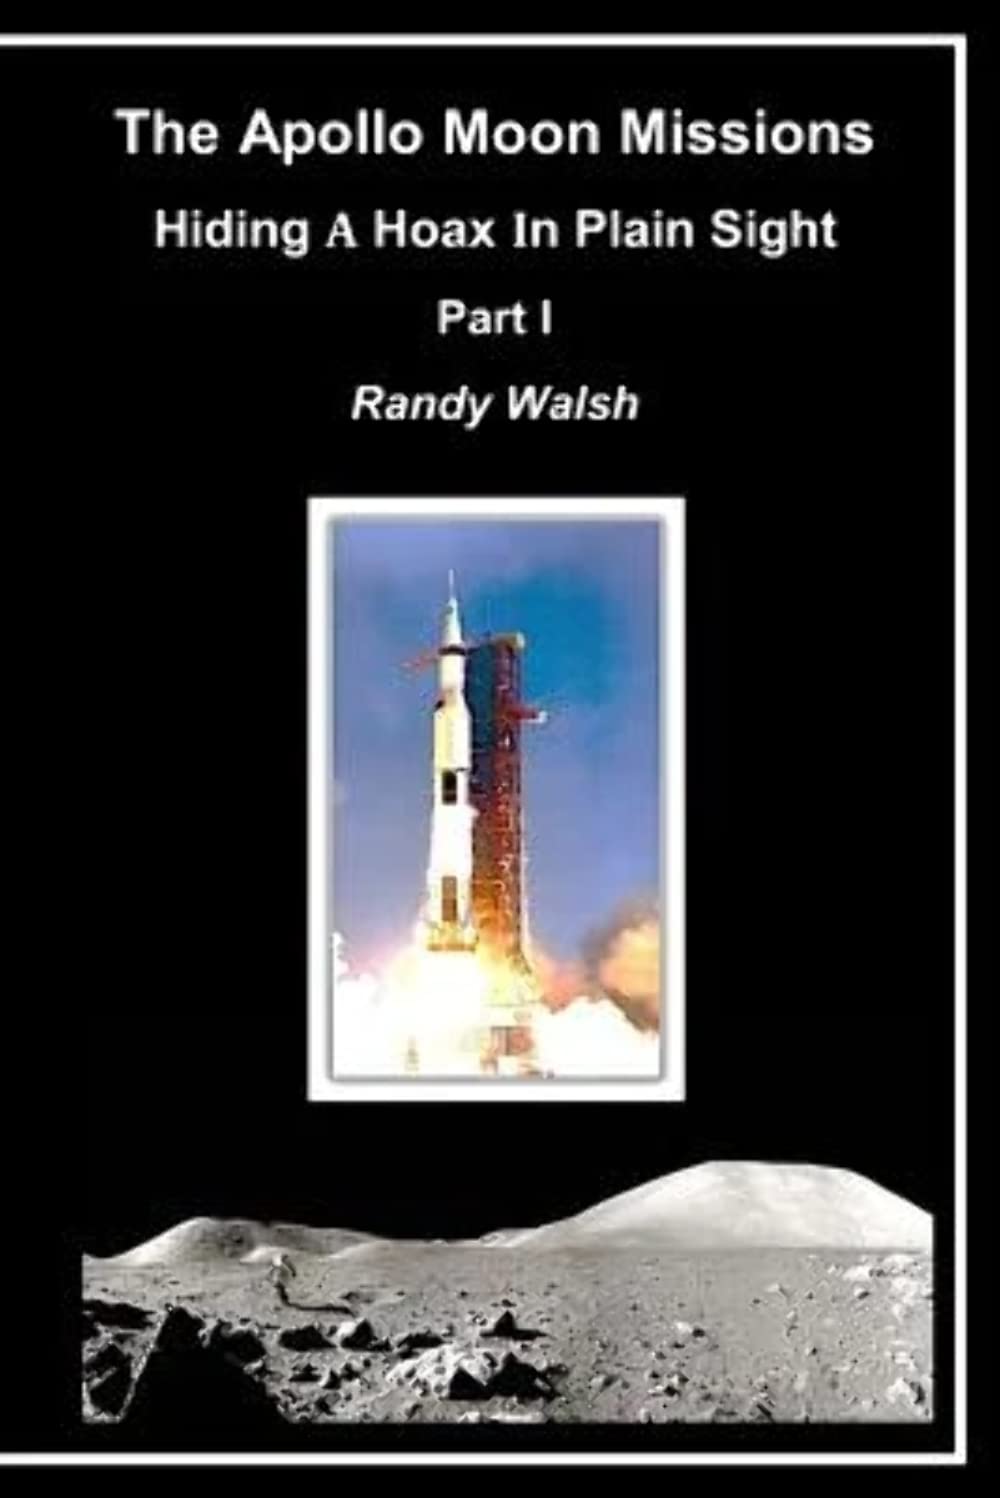 Randy Walsh on the Apollo Mission